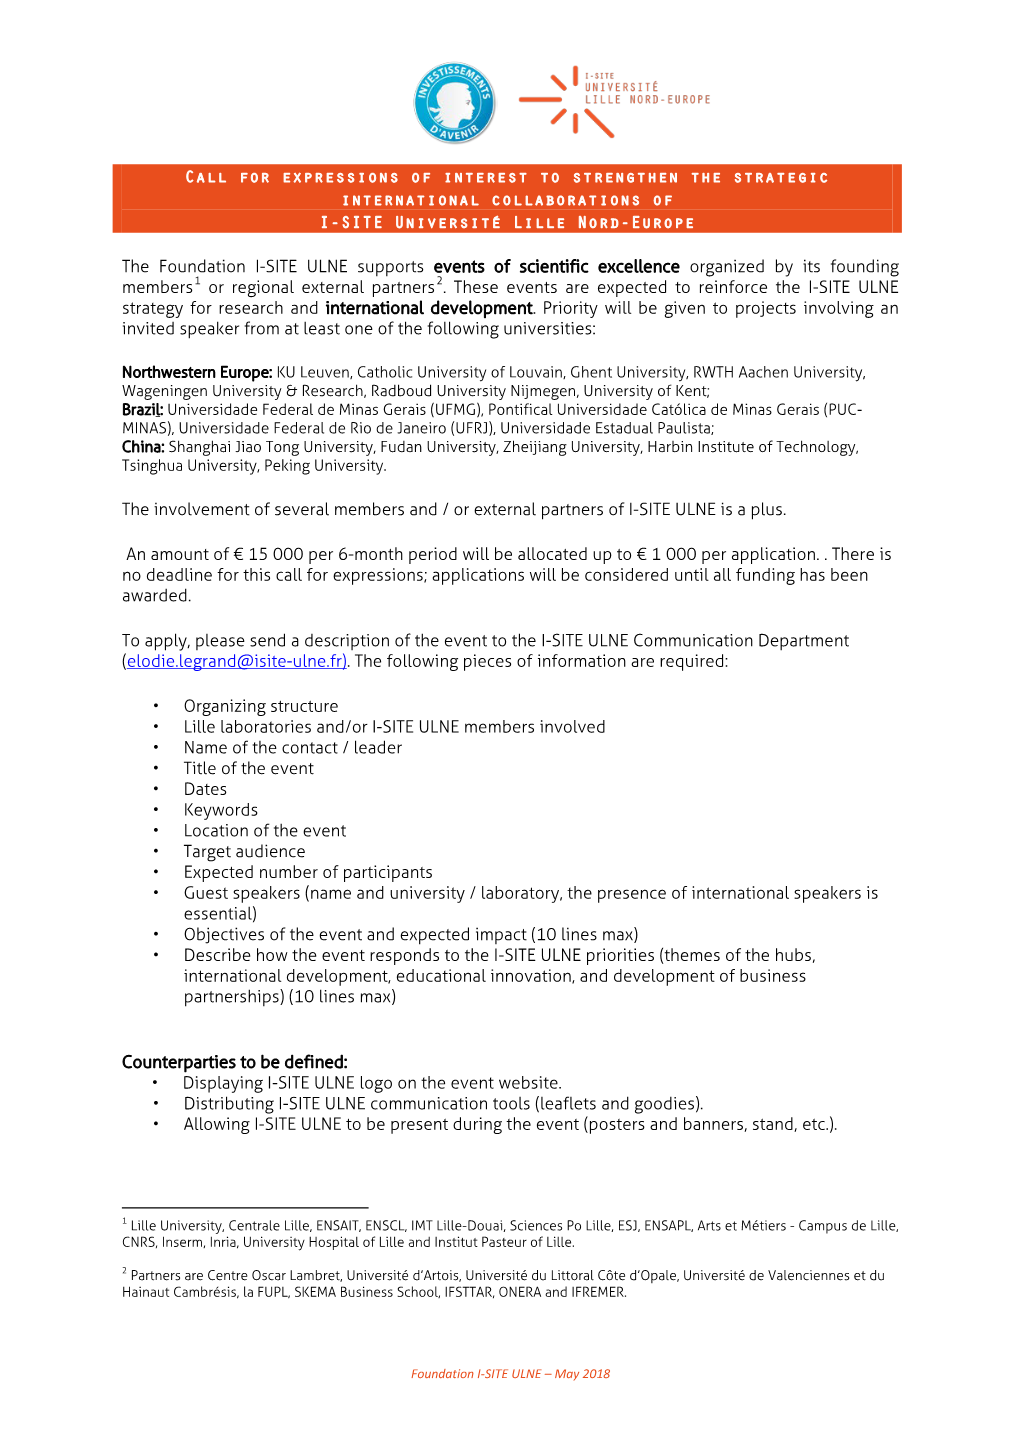 Call for Expressions of Interest to Strengthen the Strategic International Collaborations of I-SITE Université Lille Nord-Europe